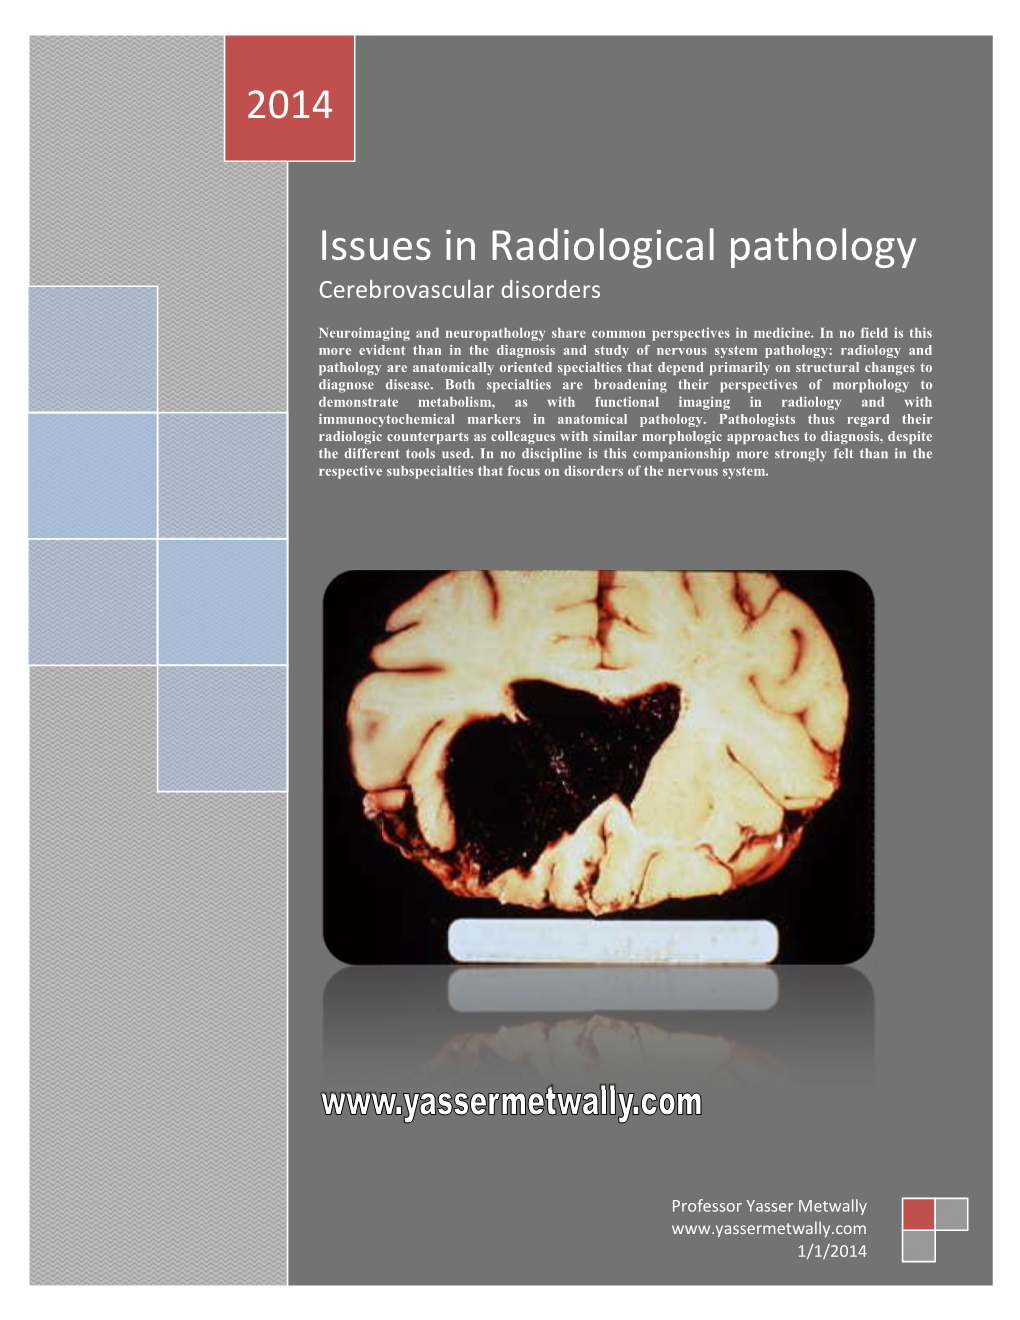 Radiological Pathology of Cerebrovascular Disorders